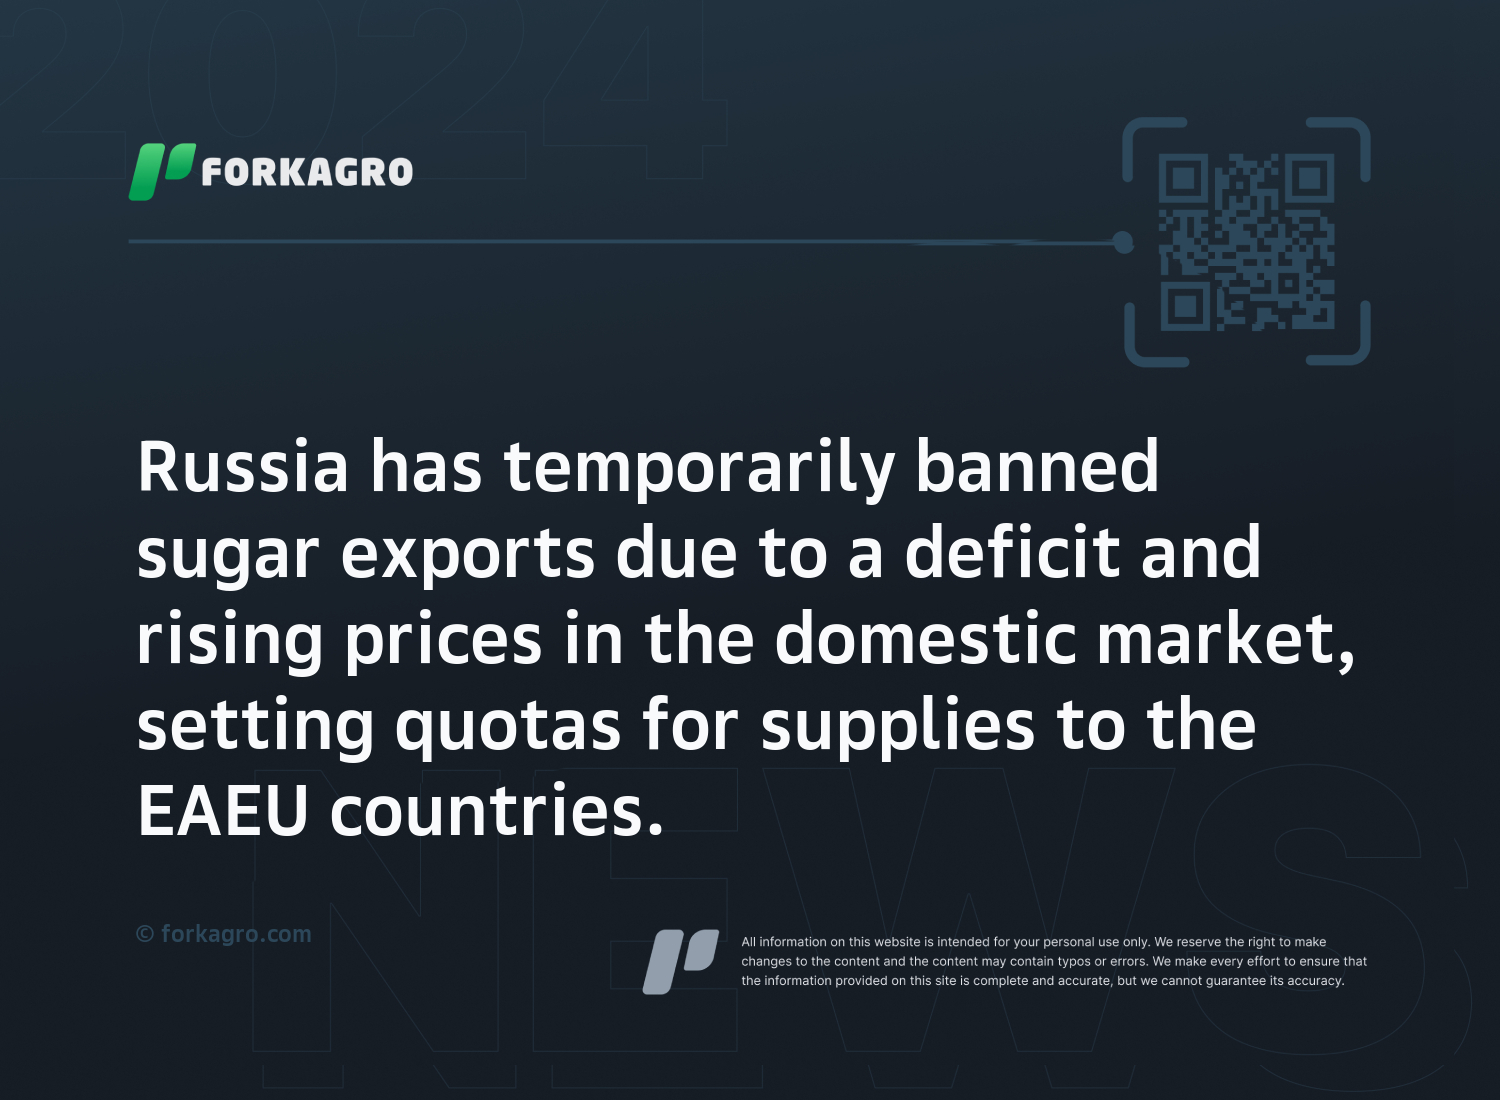 Russia has temporarily banned sugar exports due to a deficit and rising prices in the domestic market, setting quotas for supplies to the EAEU countries.